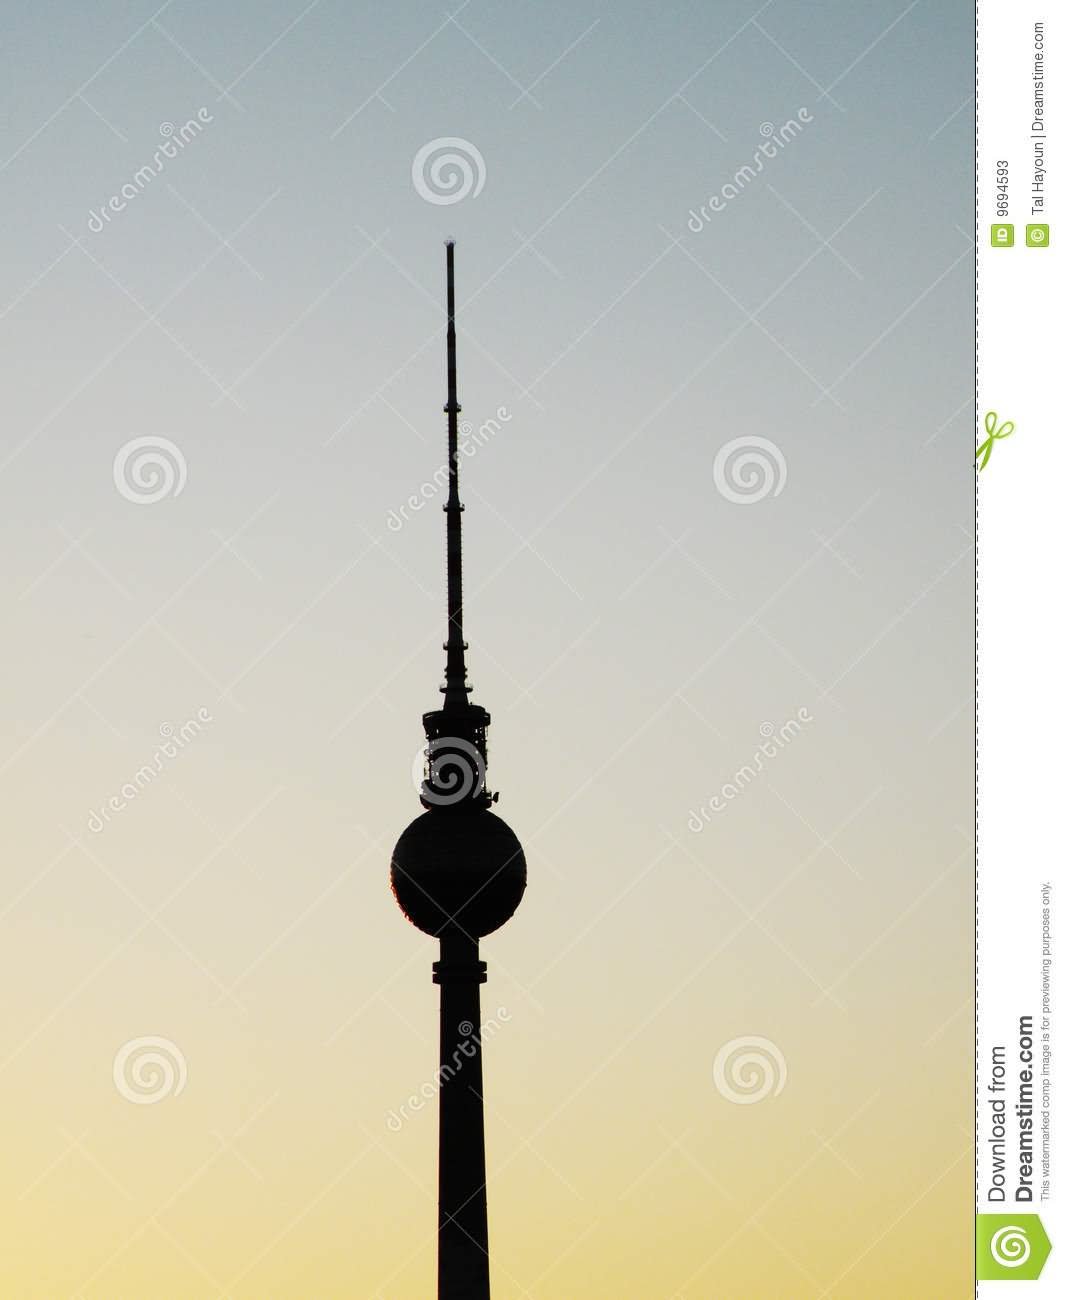 Silhouette View Of The Fernsehturm Tower In Berlin, Germany